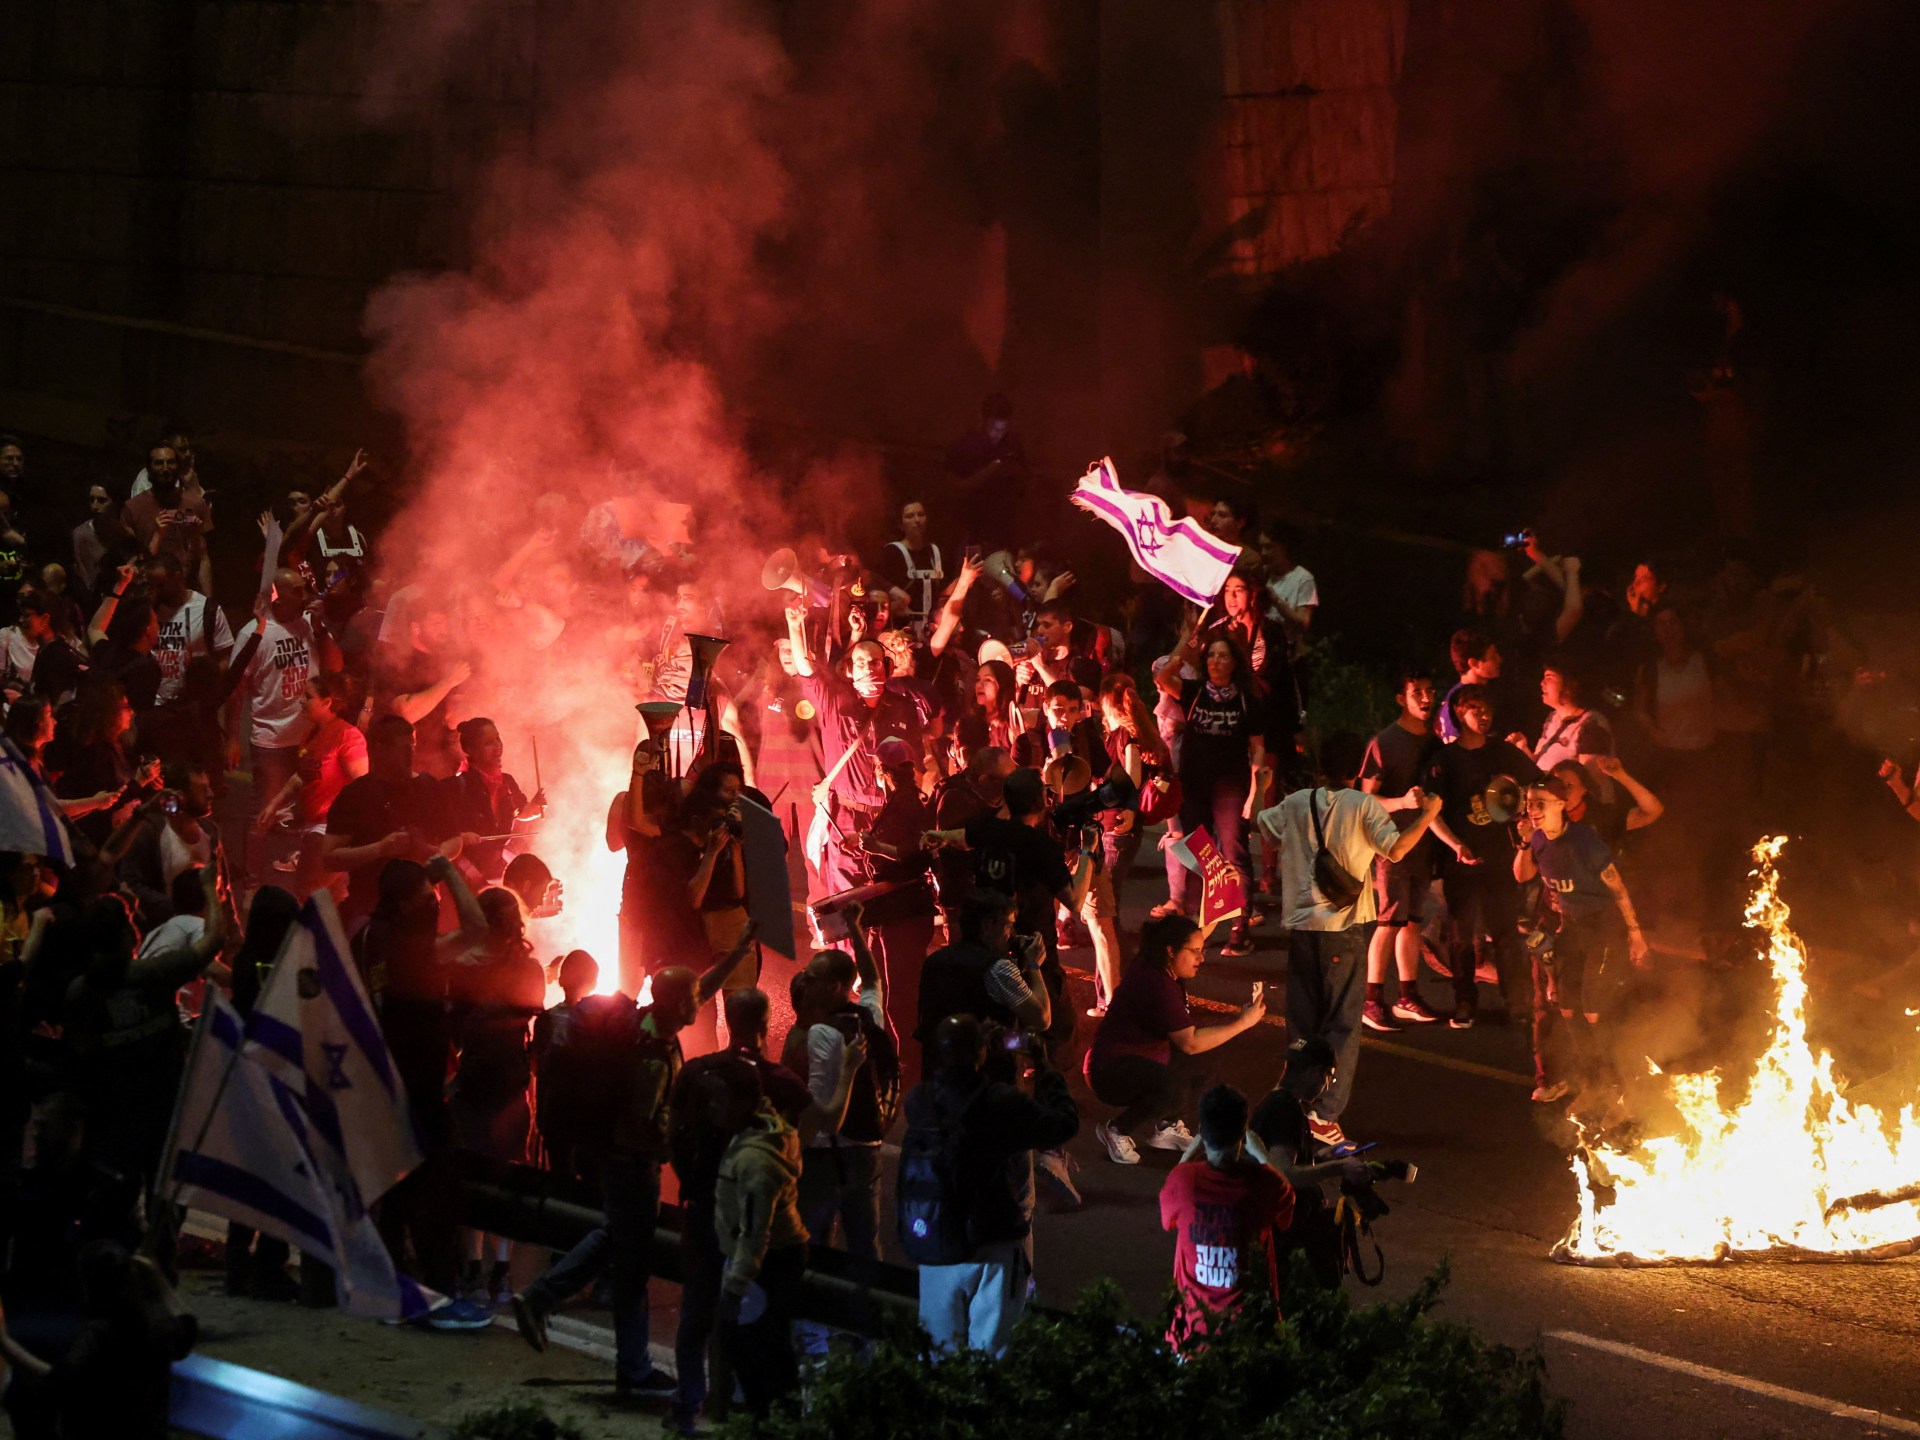 Jerusalem Rally Marks Largest Anti-Government Protest in Israel Since Gaza War